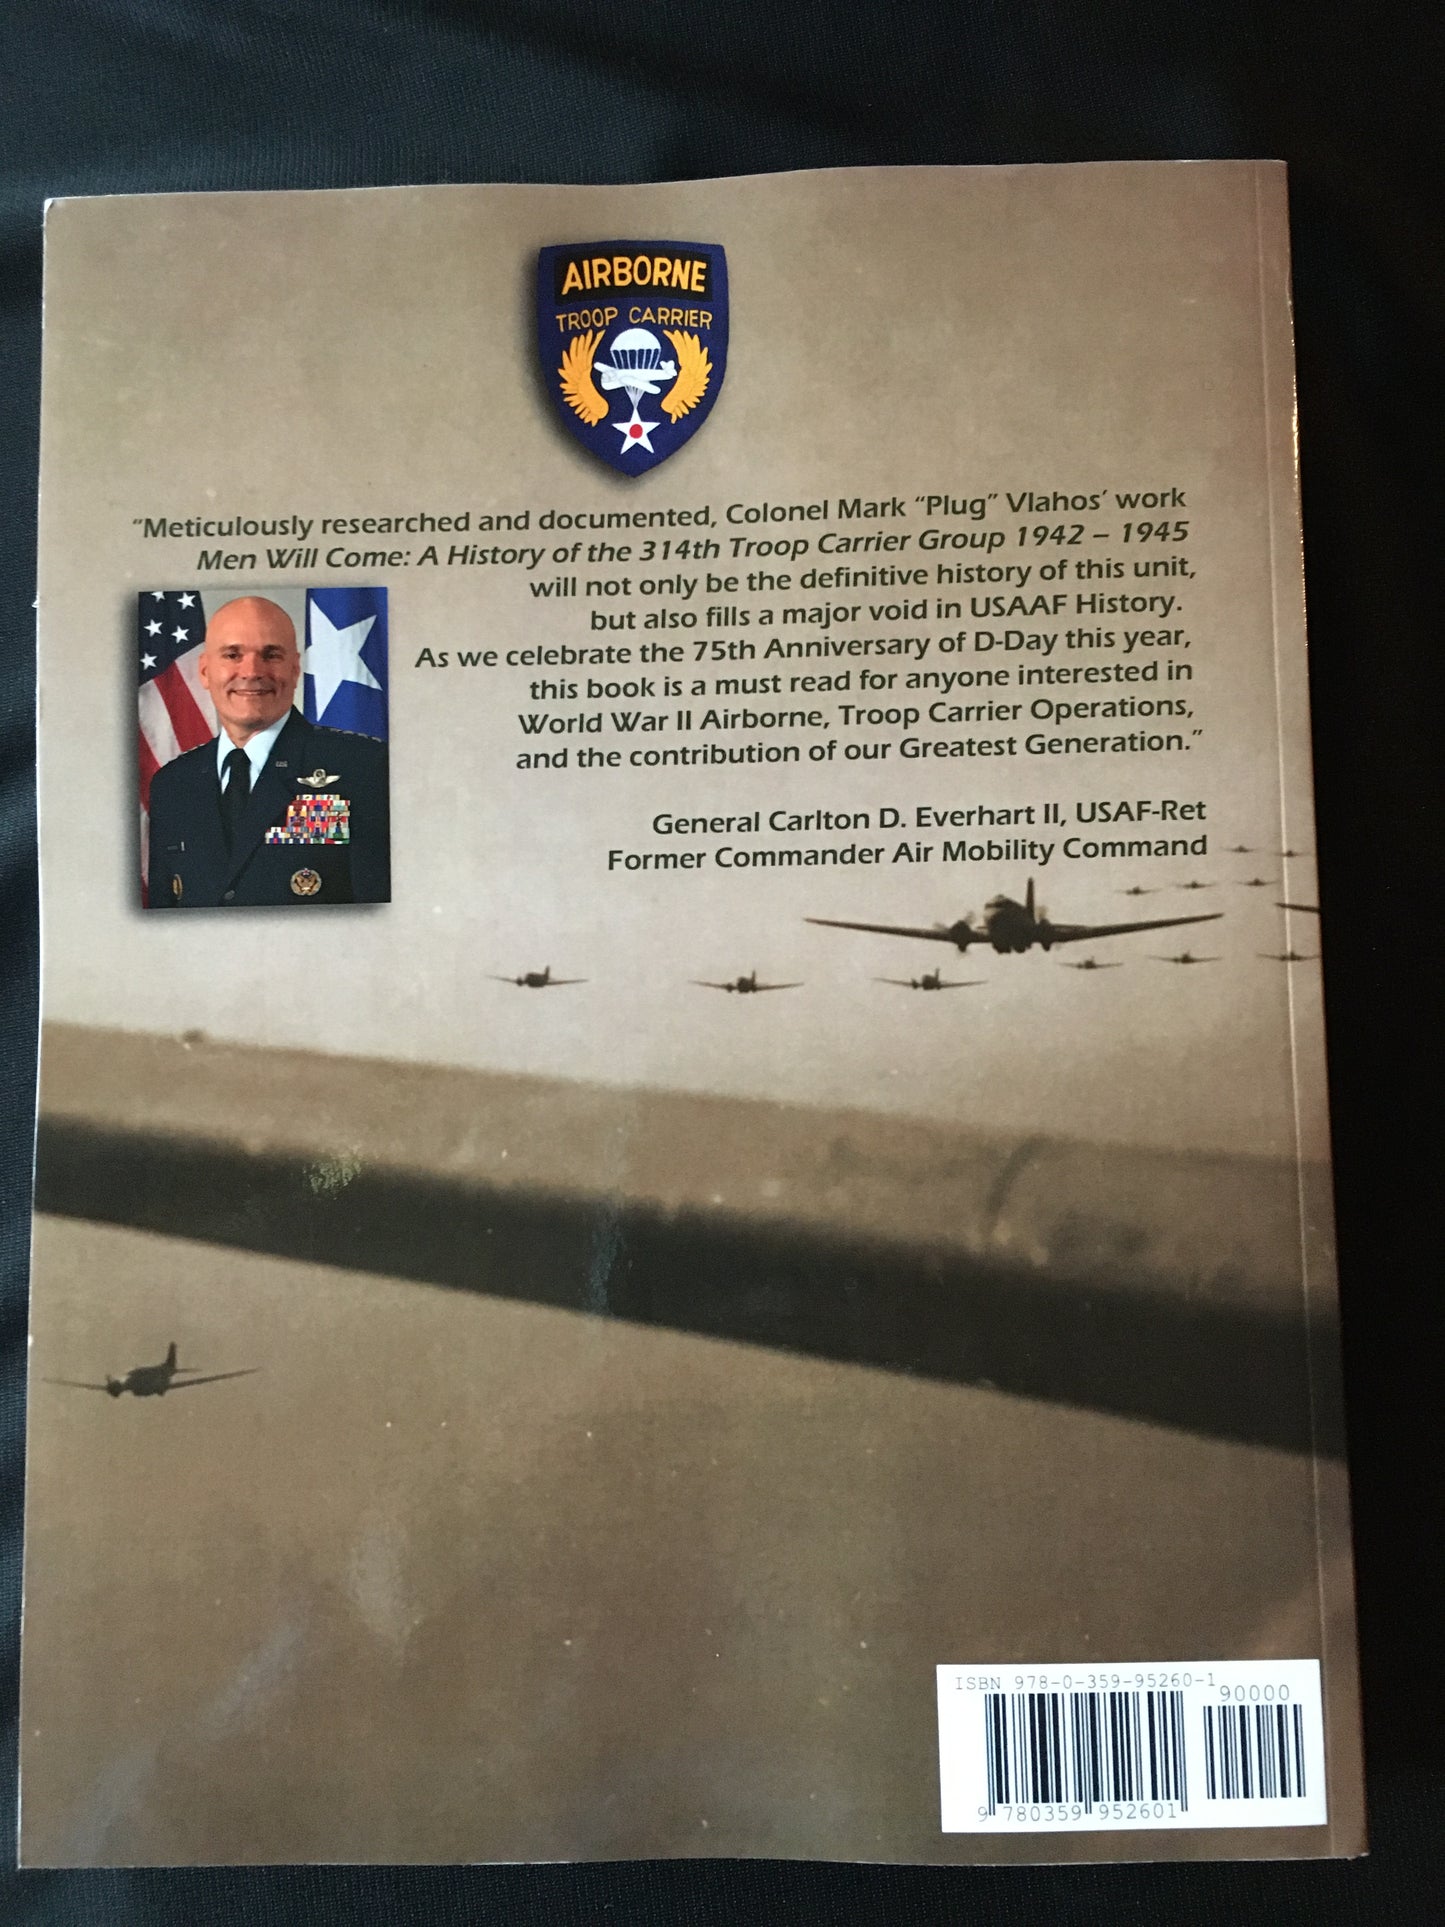 "Men Will Come - A History of the 314th Troop Carrier Group 1942-1945